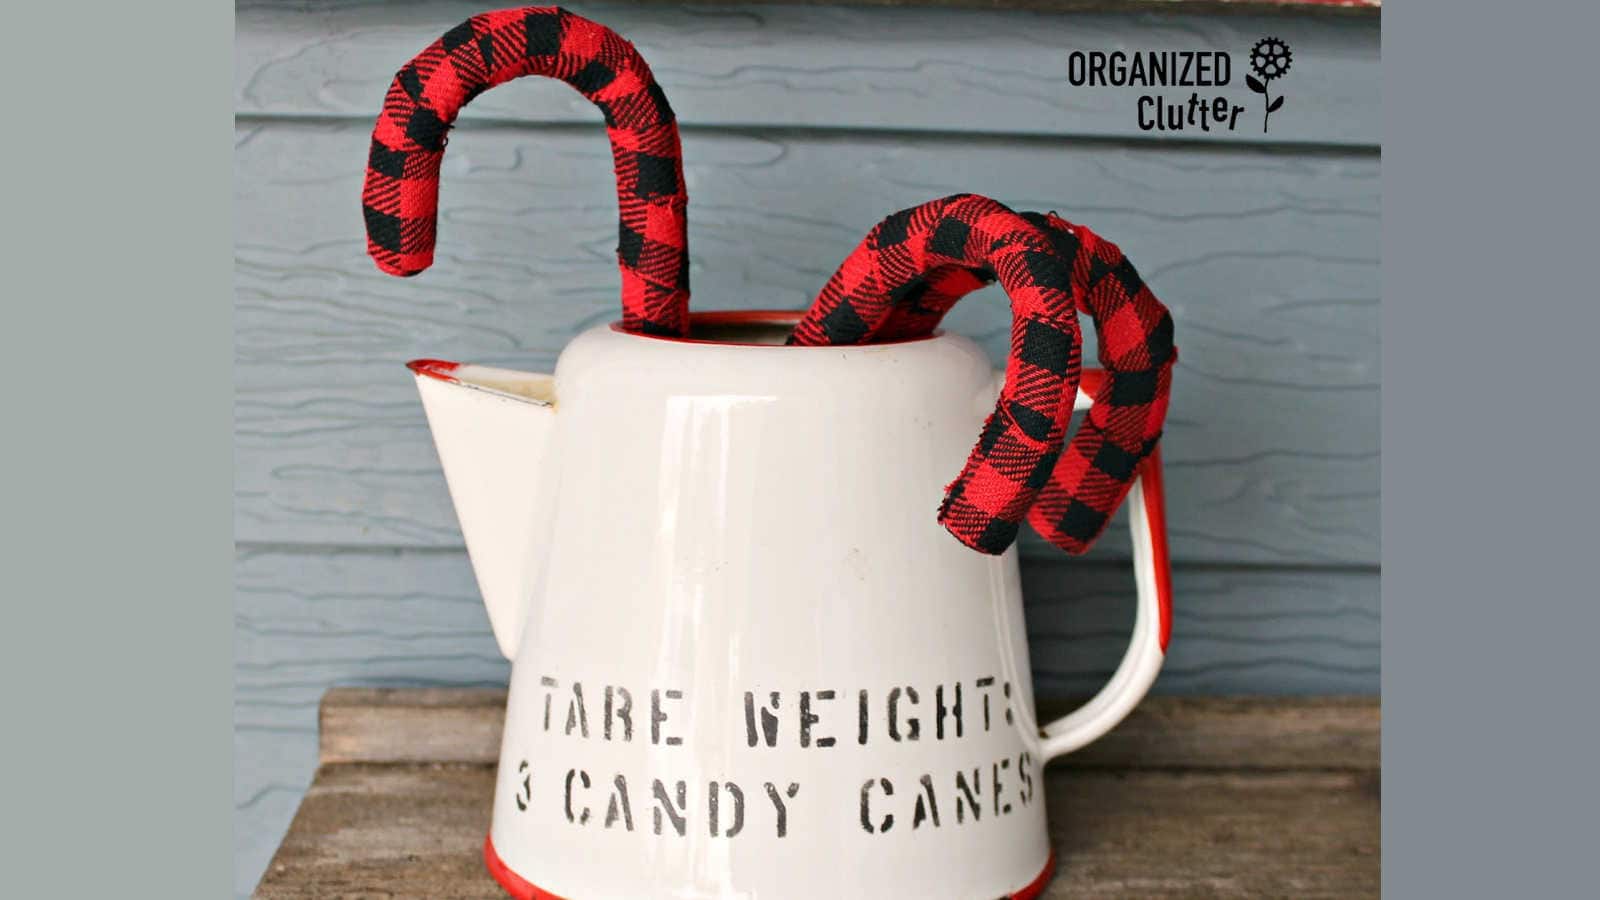 wrapping candy canes in plaid fabric